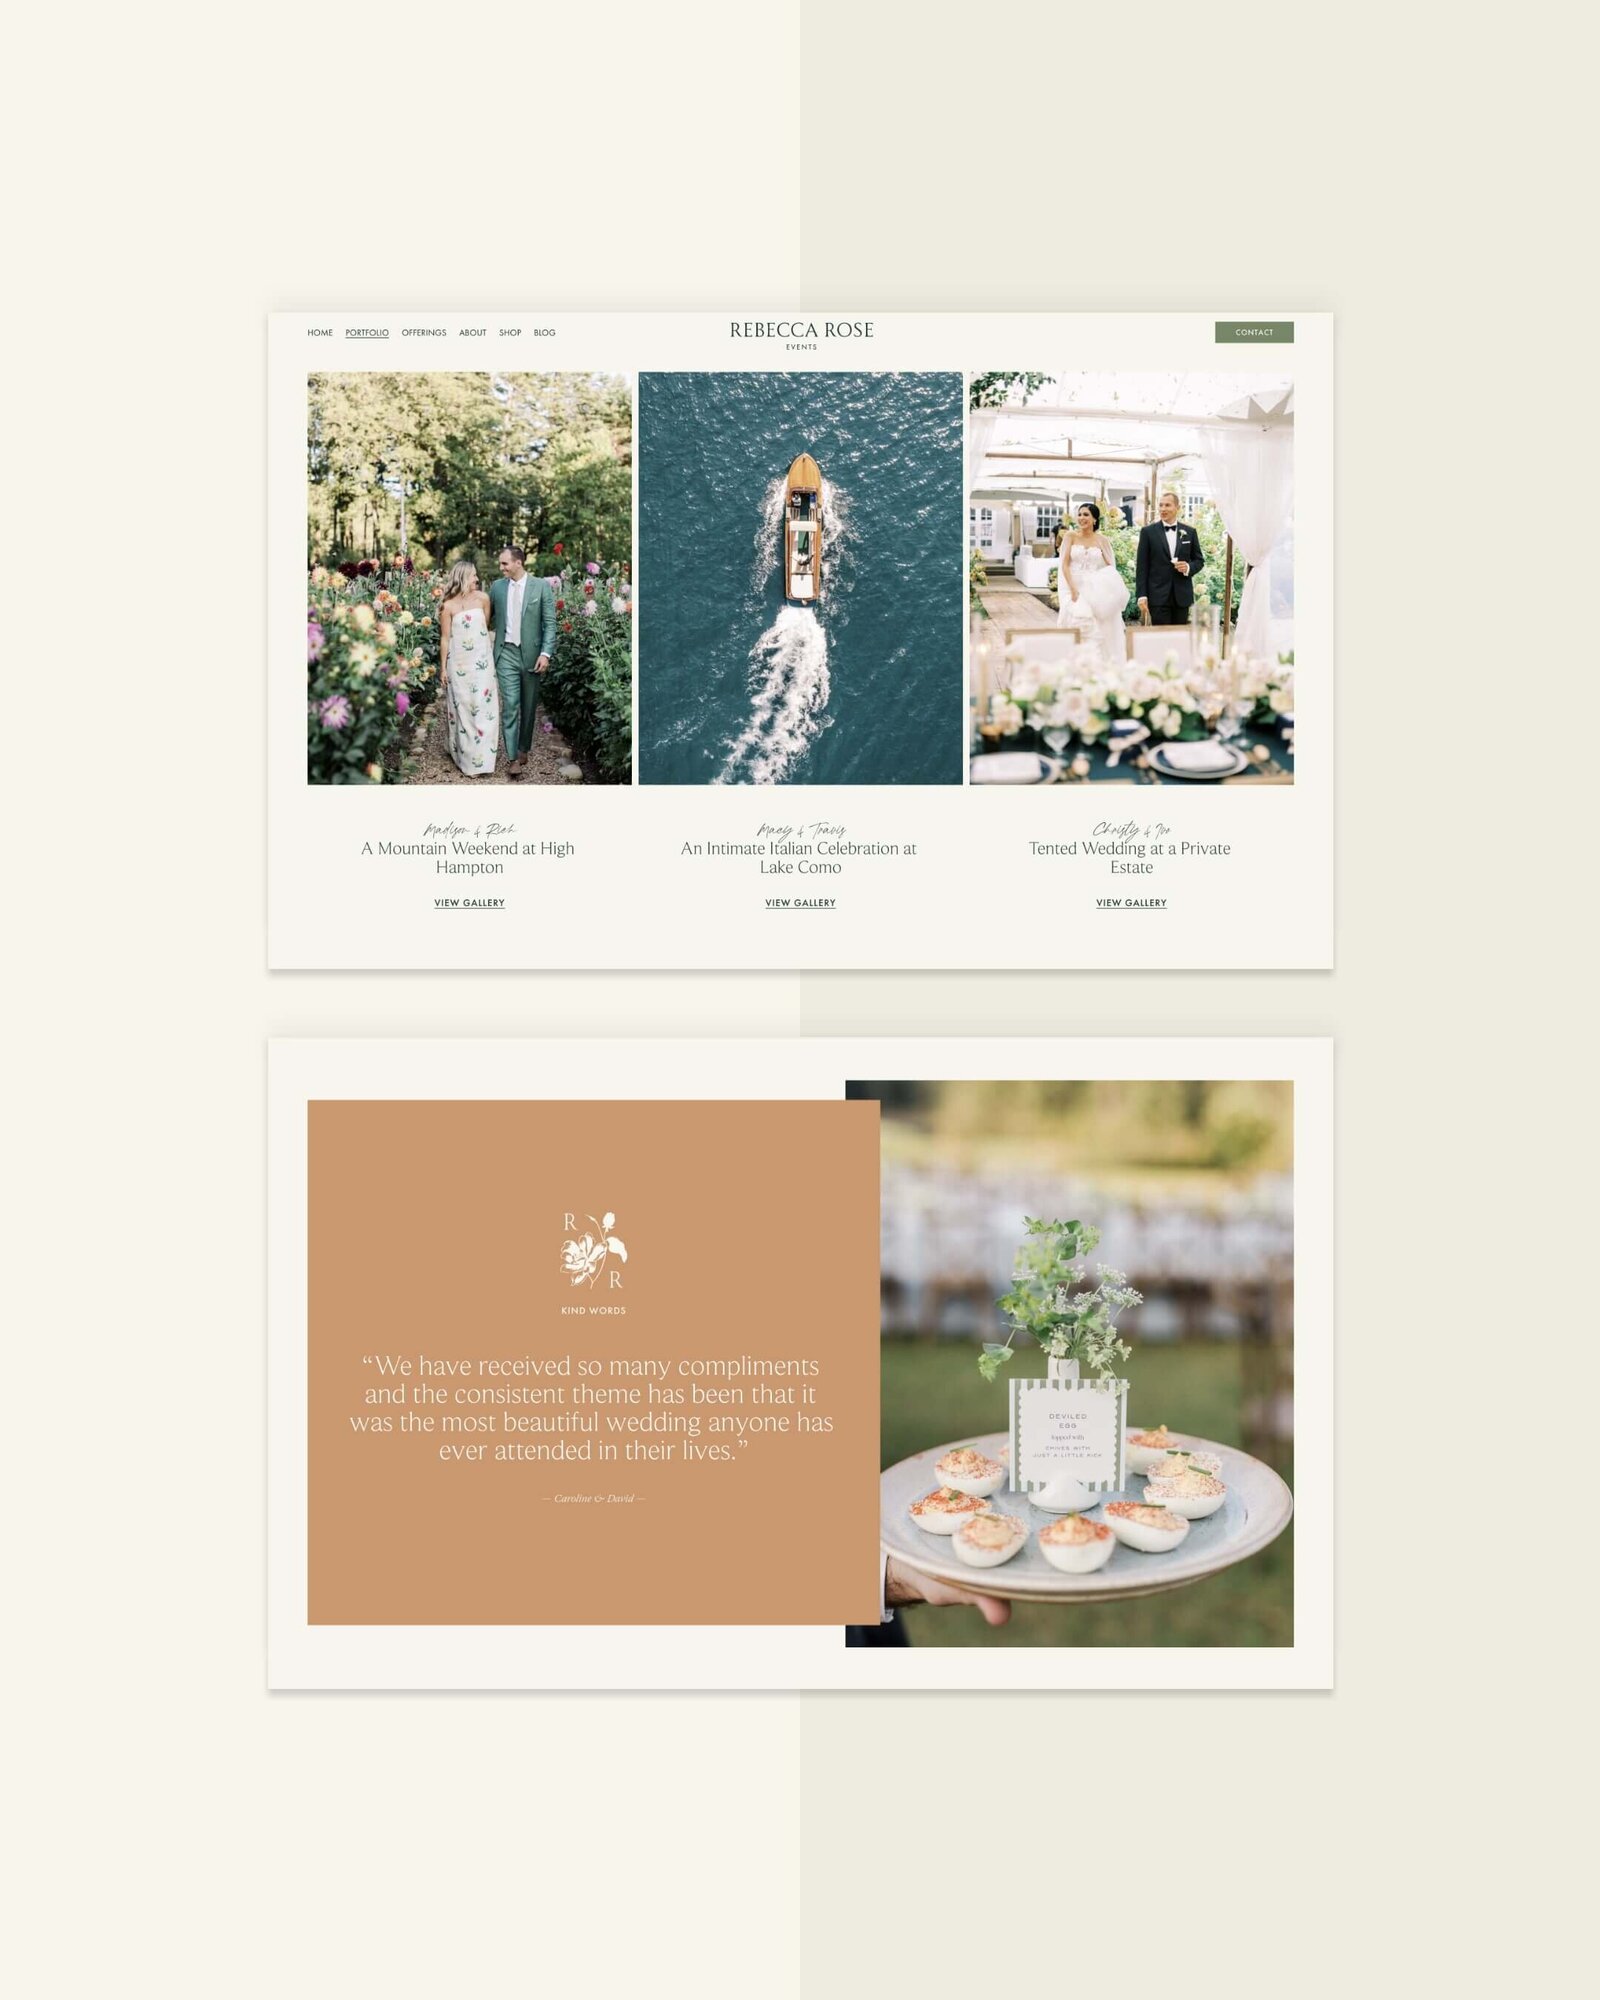 refined-website-design-for-luxury-wedding-planner-Rebecca-Rose-by-letter-south-RRE-4